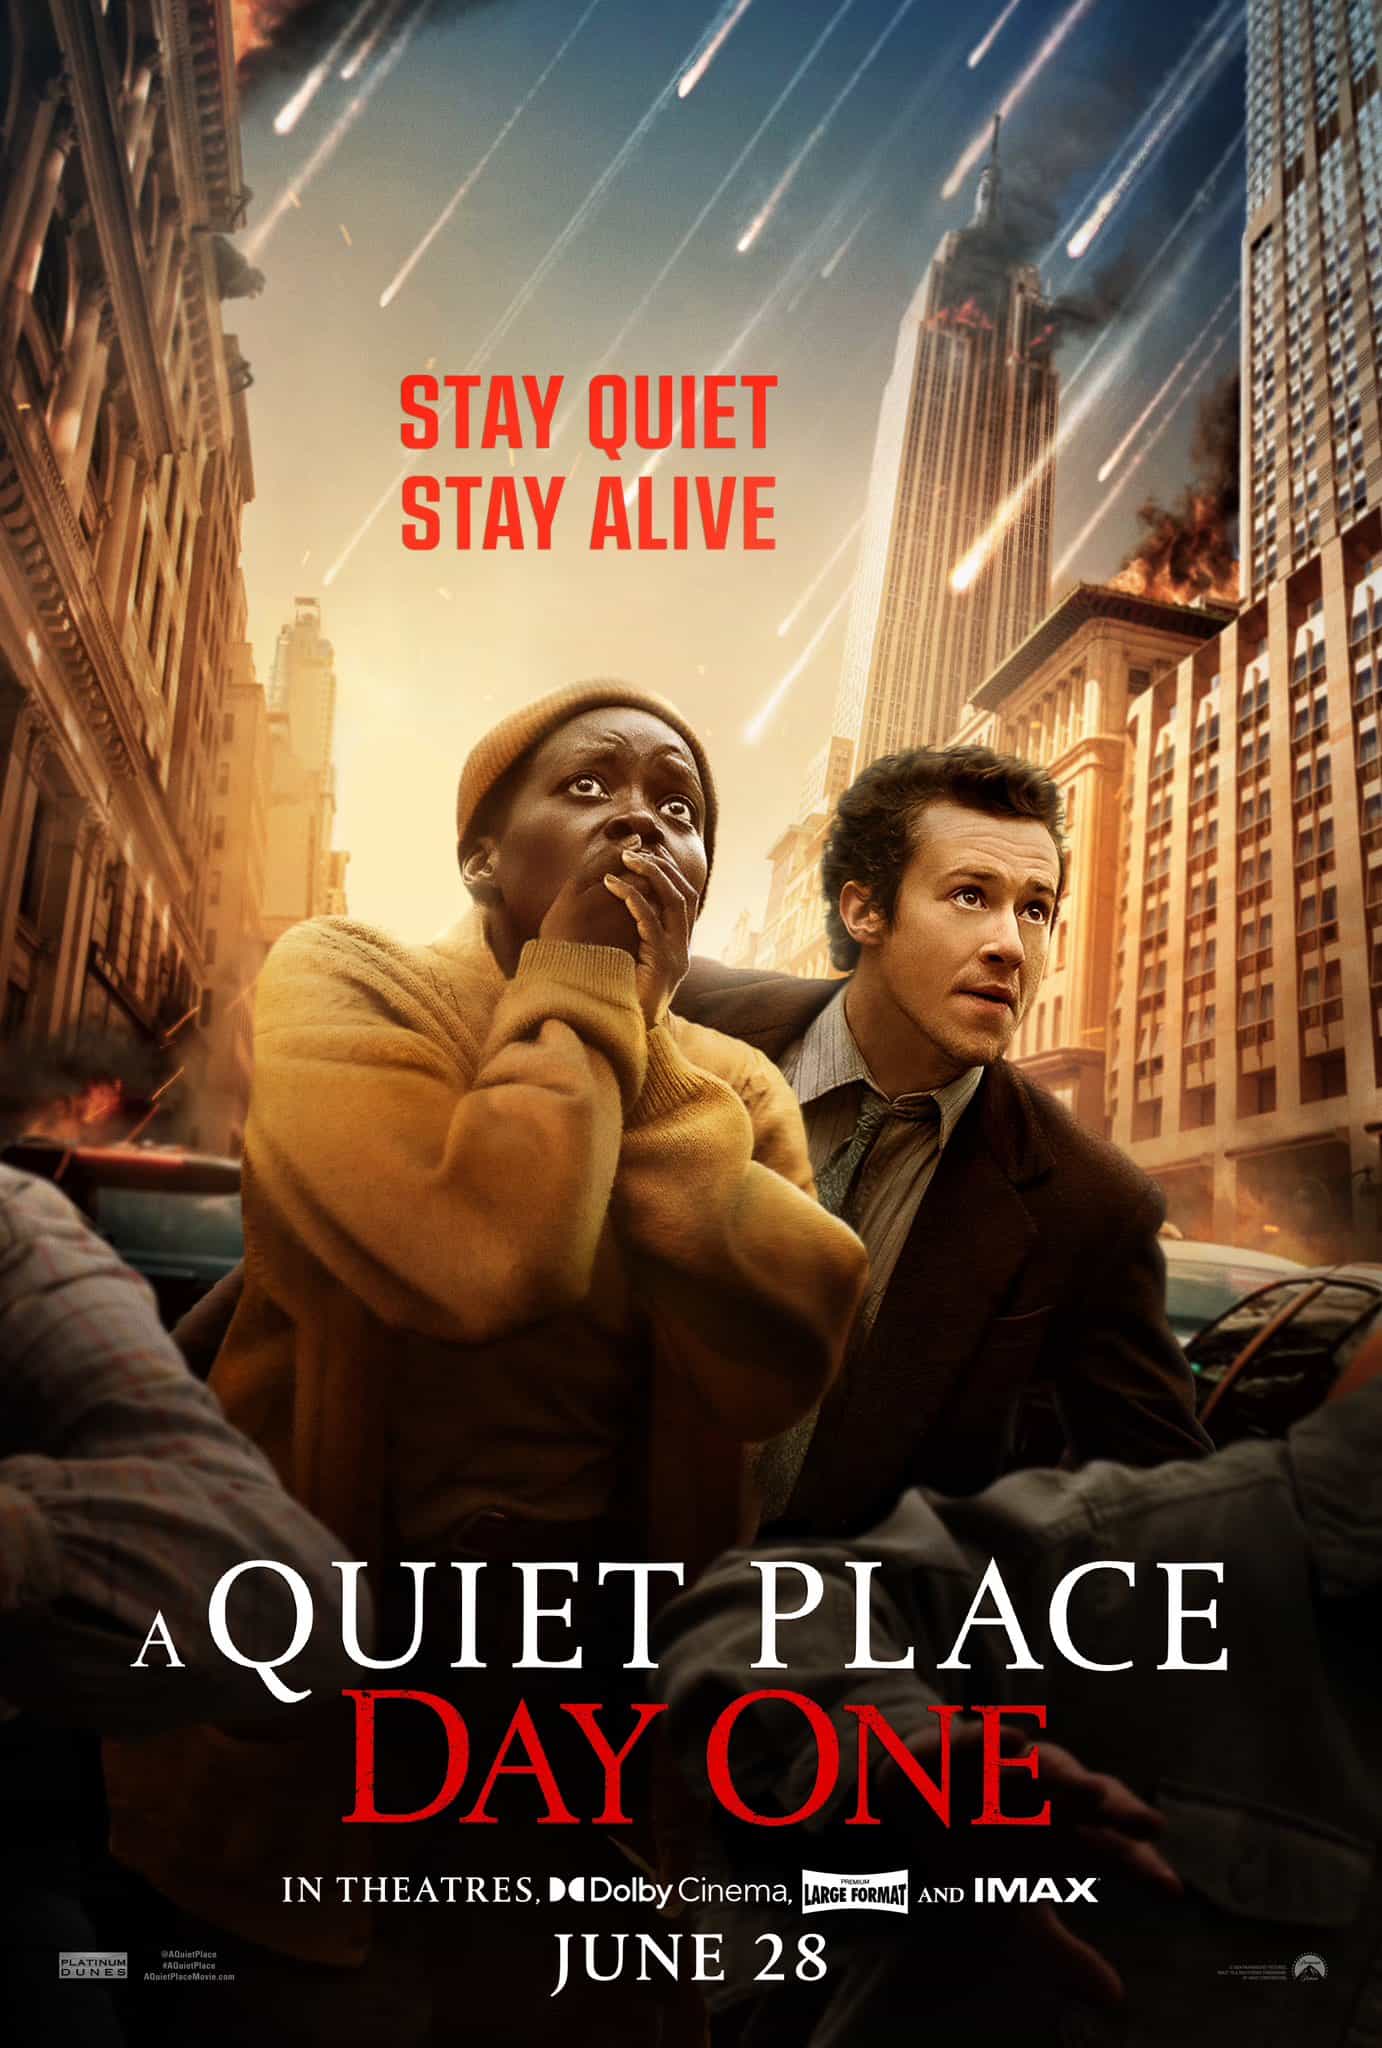 Check out the new trailer and poster for upcoming movie A Quiet Place: Day One which stars Lupita Nyong